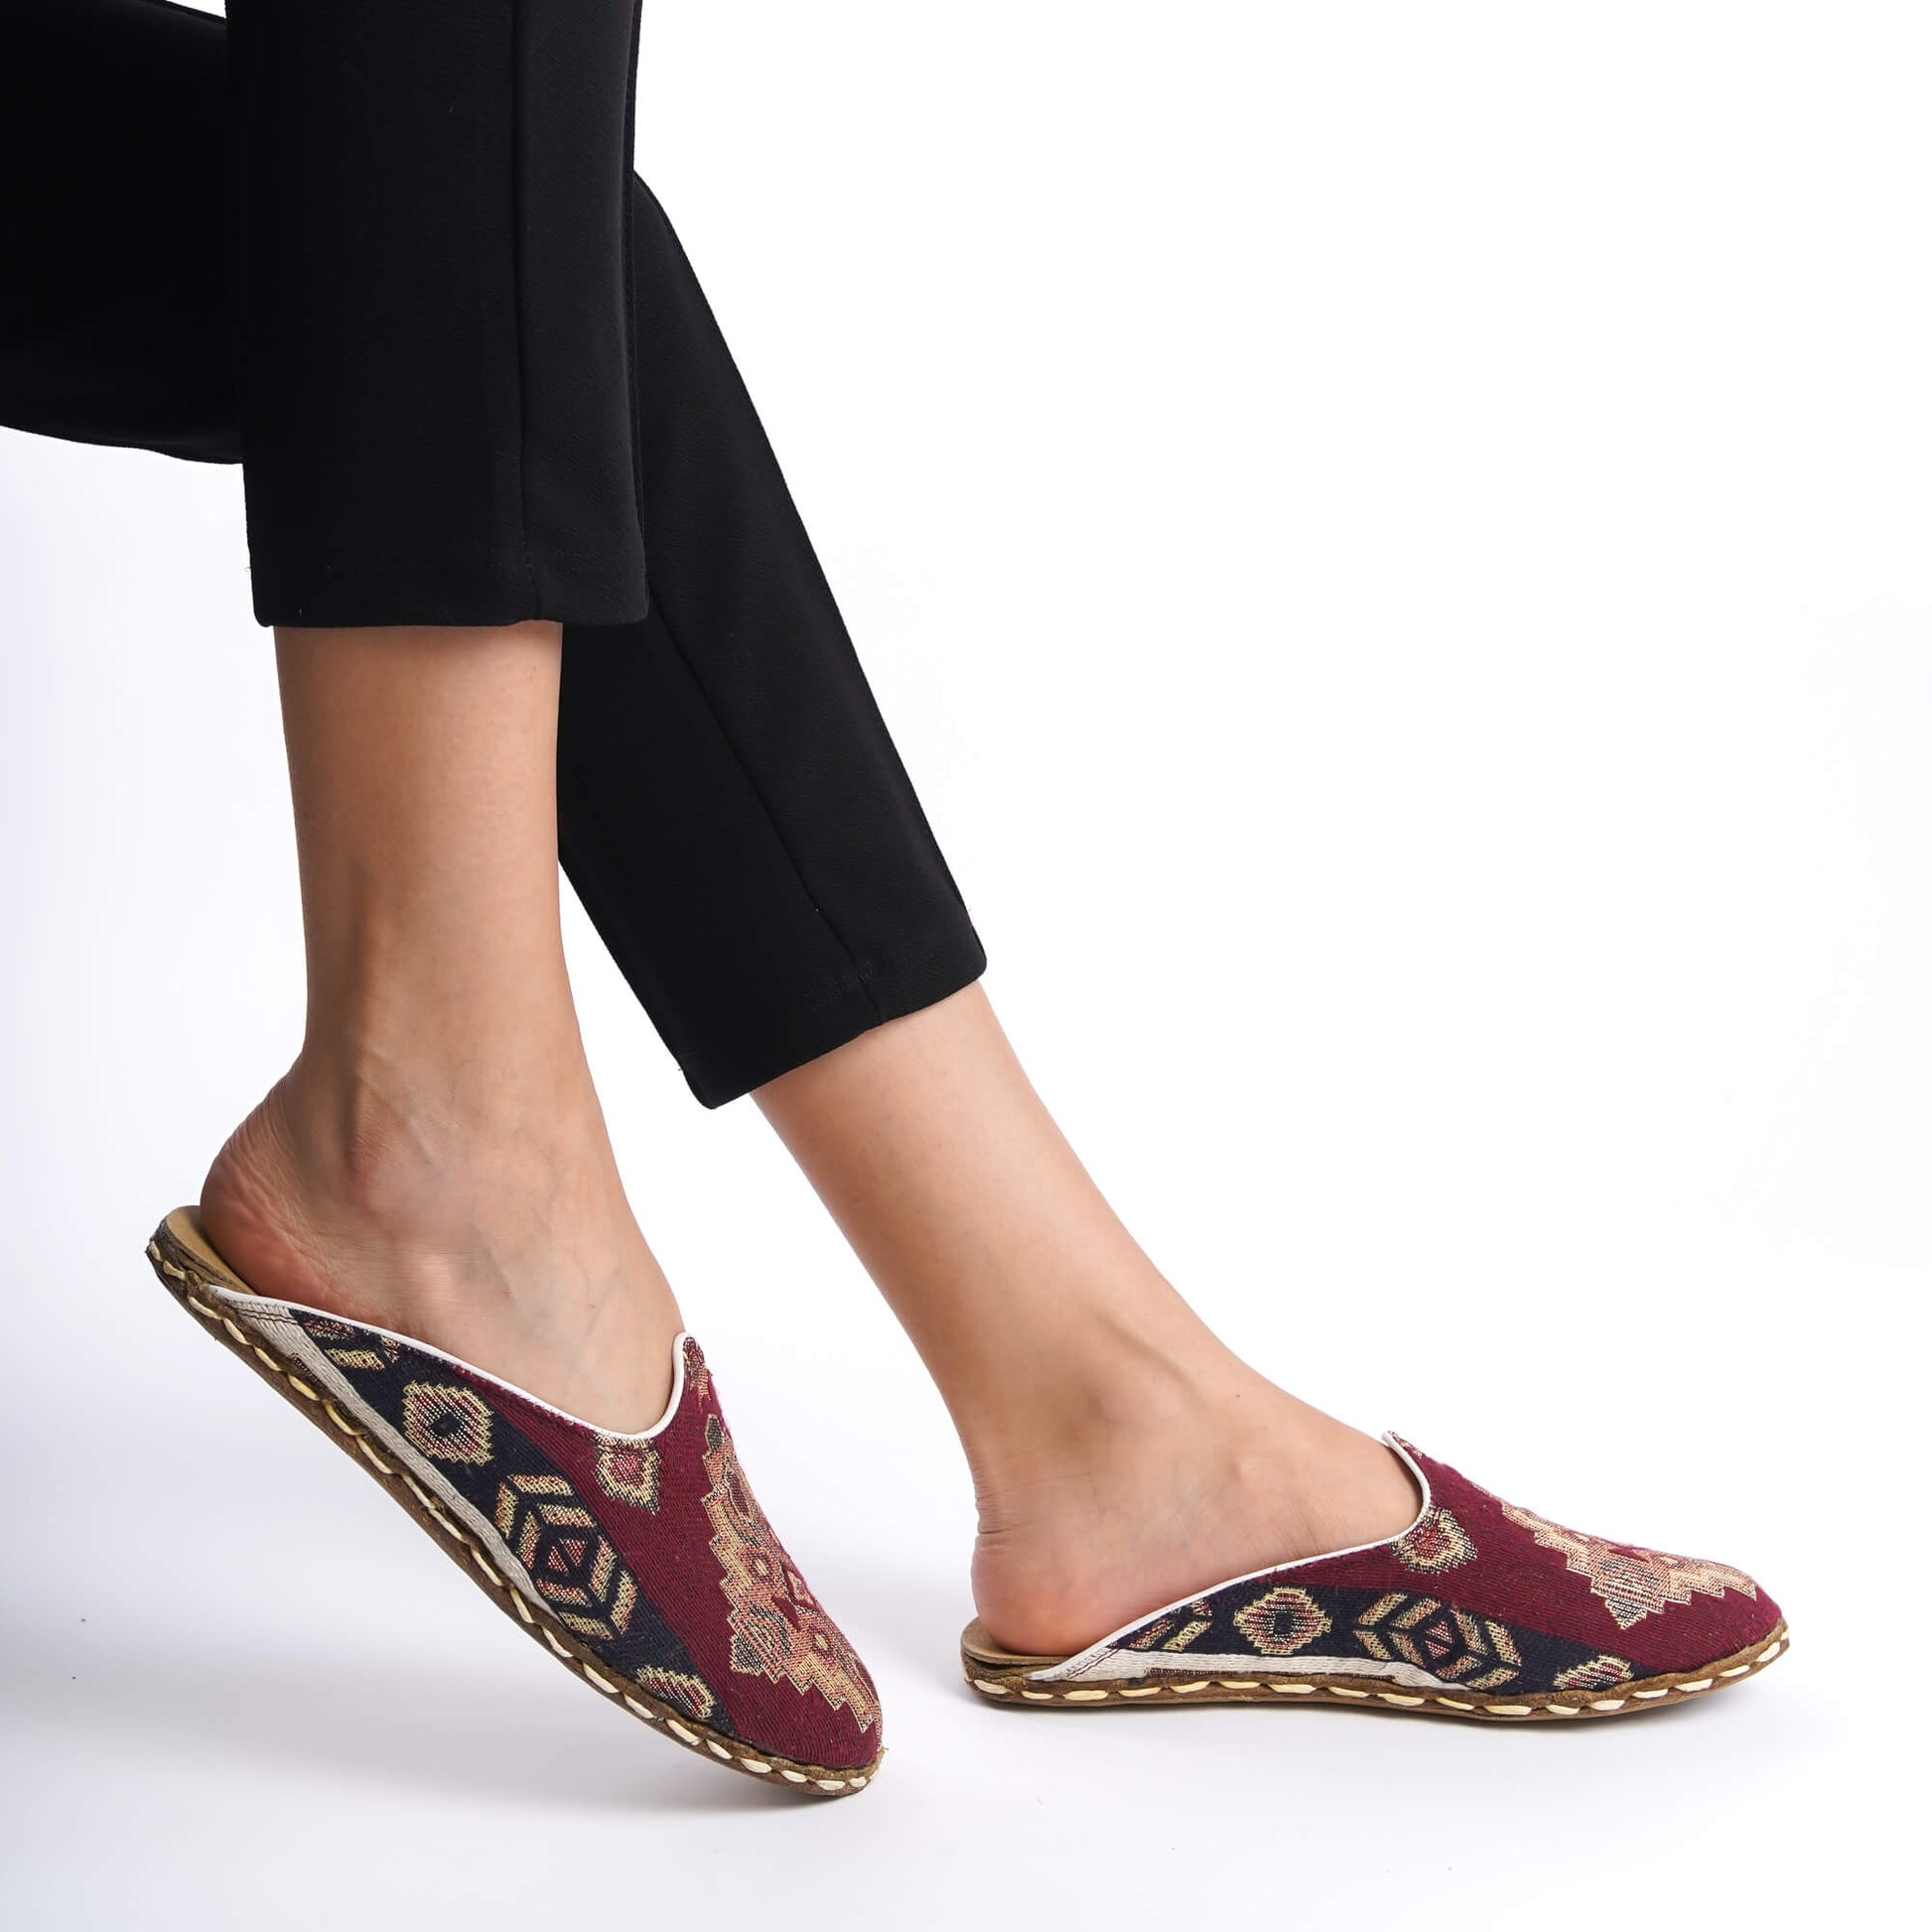 Handcrafted Turkish Kilim Mules – Zero-Drop Leather Shoes with Ethnic Red and Gold Designs